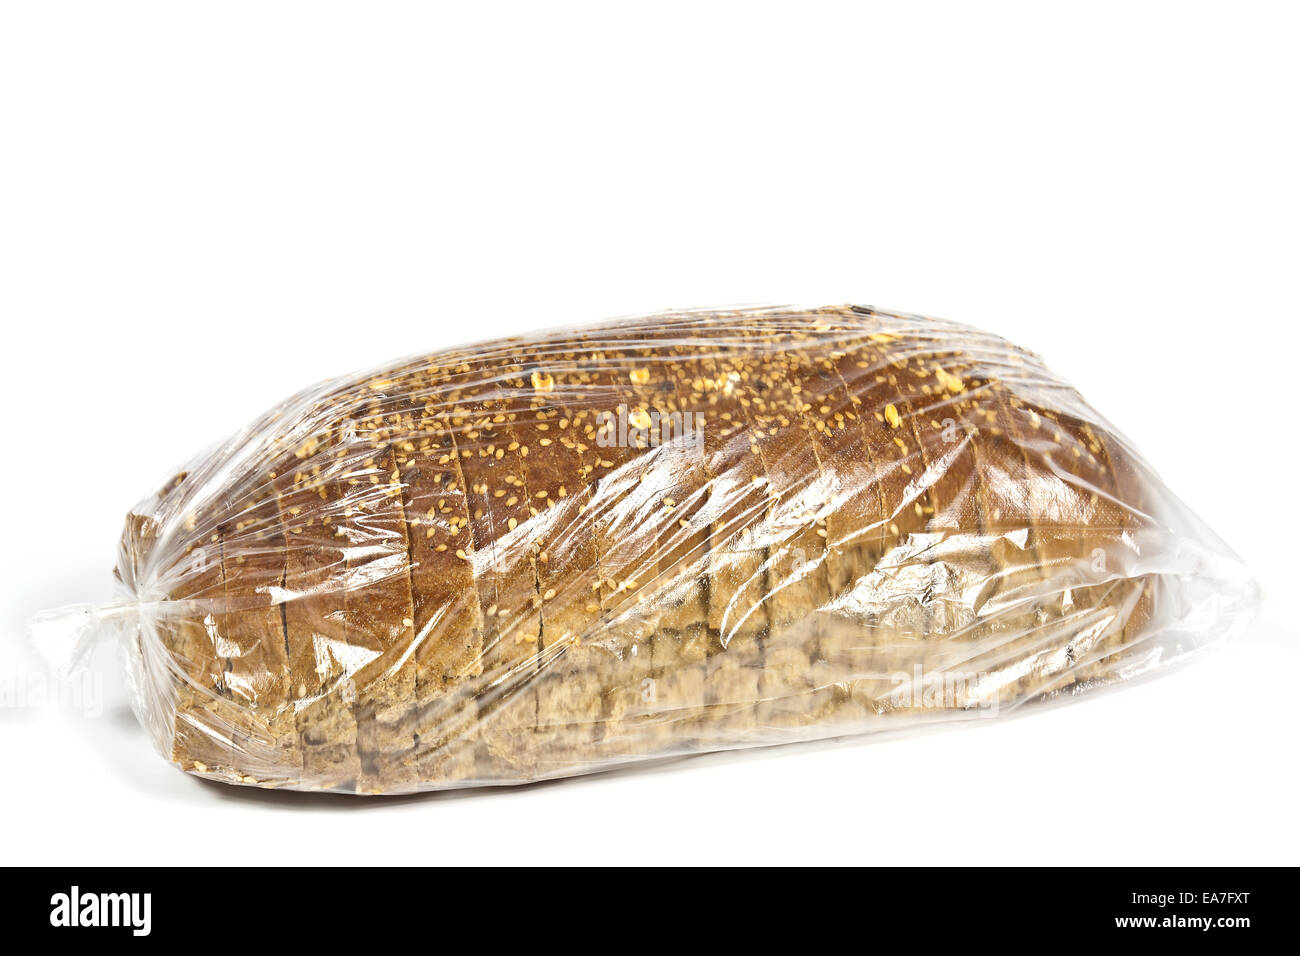 Packed in plastic bag hand-made rye bread diet Stock Photo